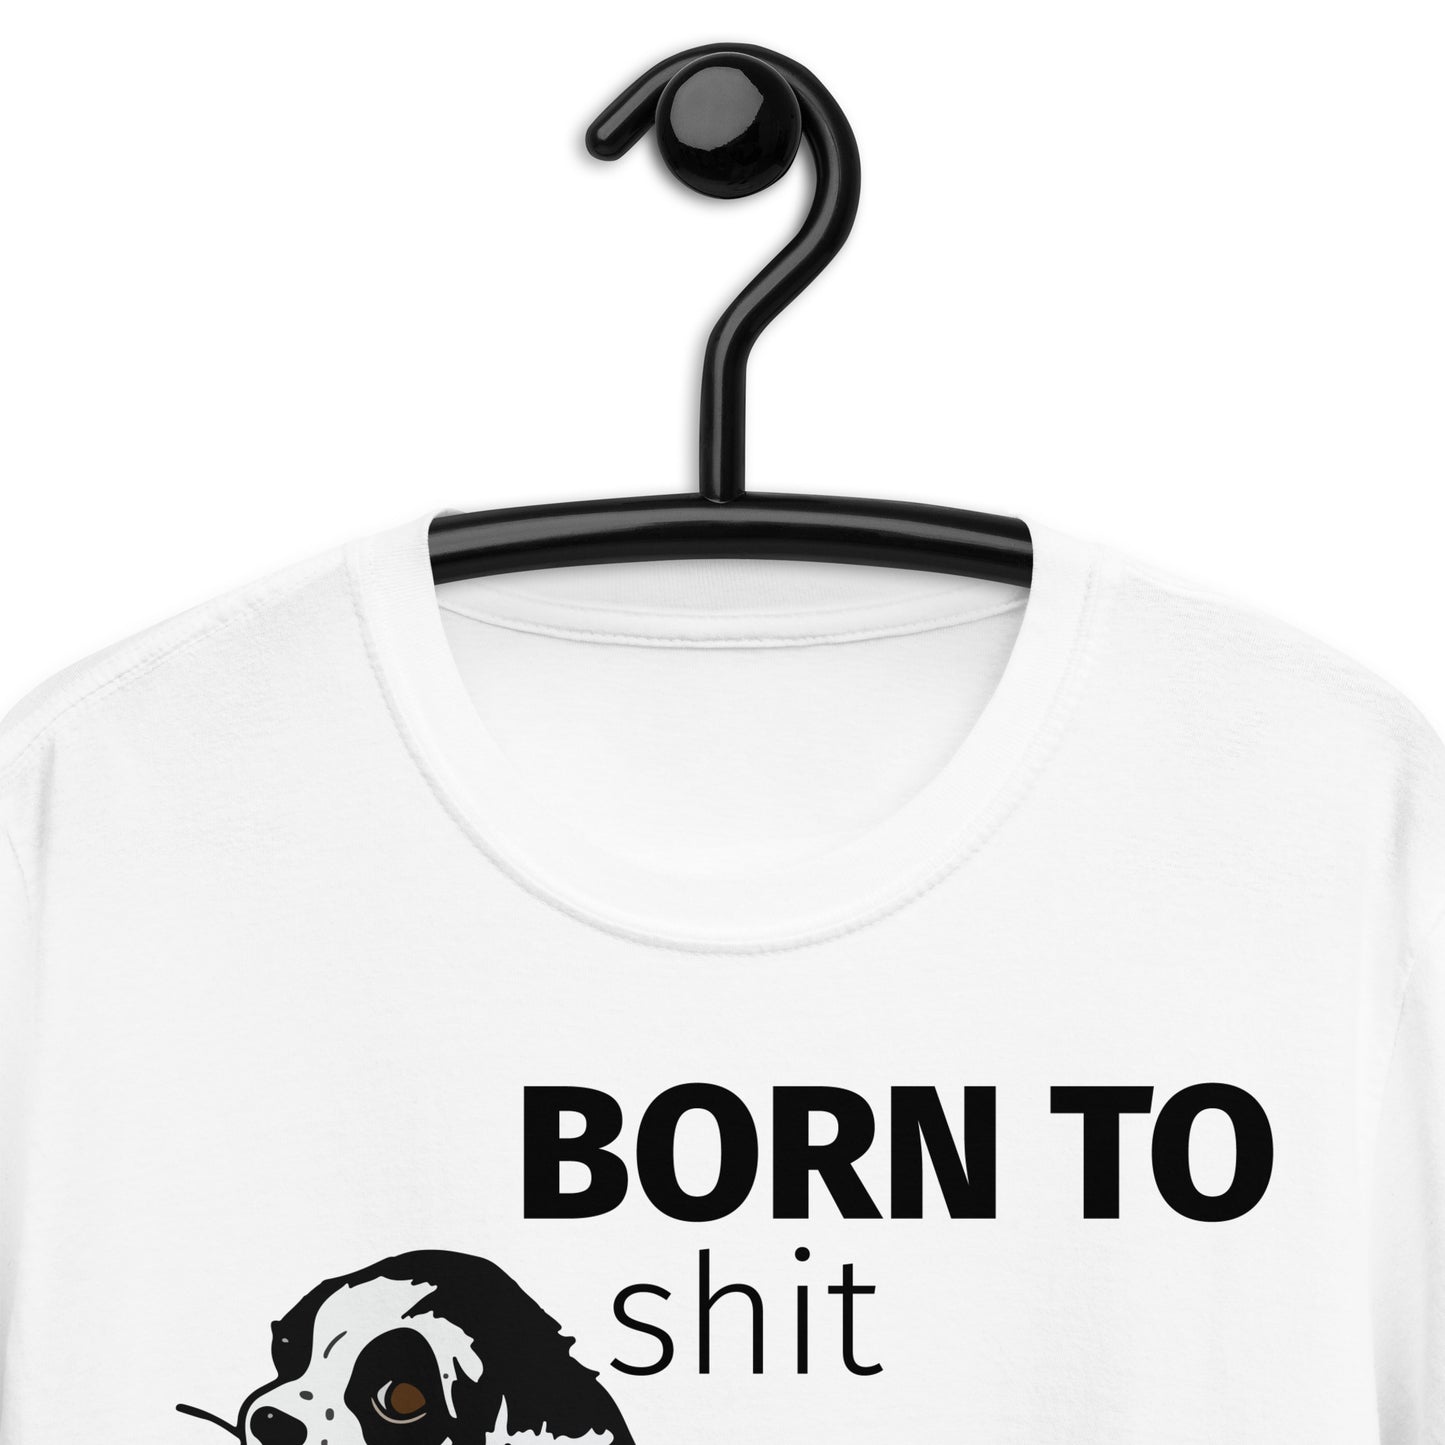 BORN TO shit force to wipe Short-Sleeve Unisex T-Shirt